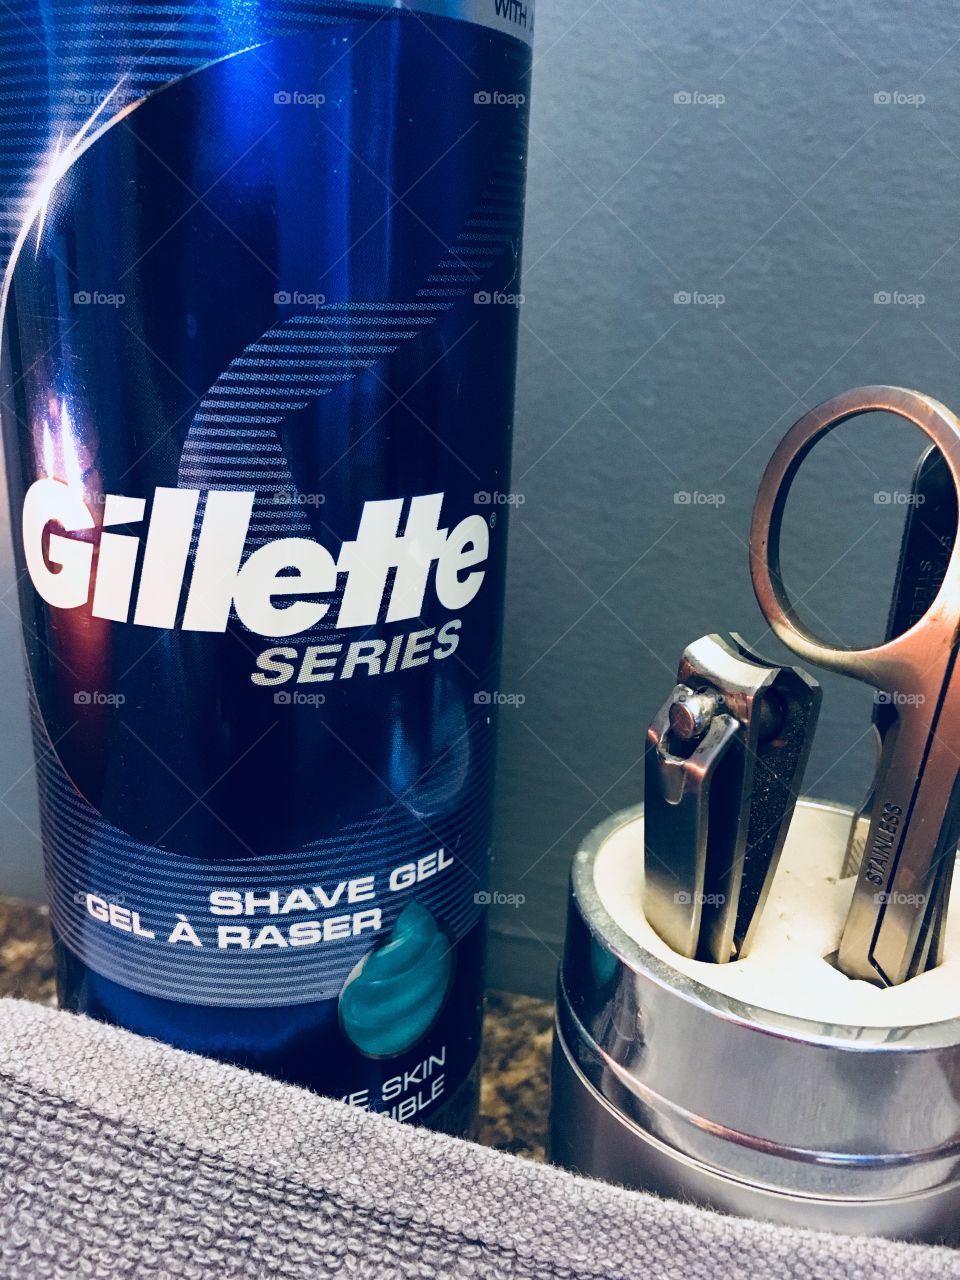 Gillette shave gel and grooming tools. Getting ready to shave and look his best. 